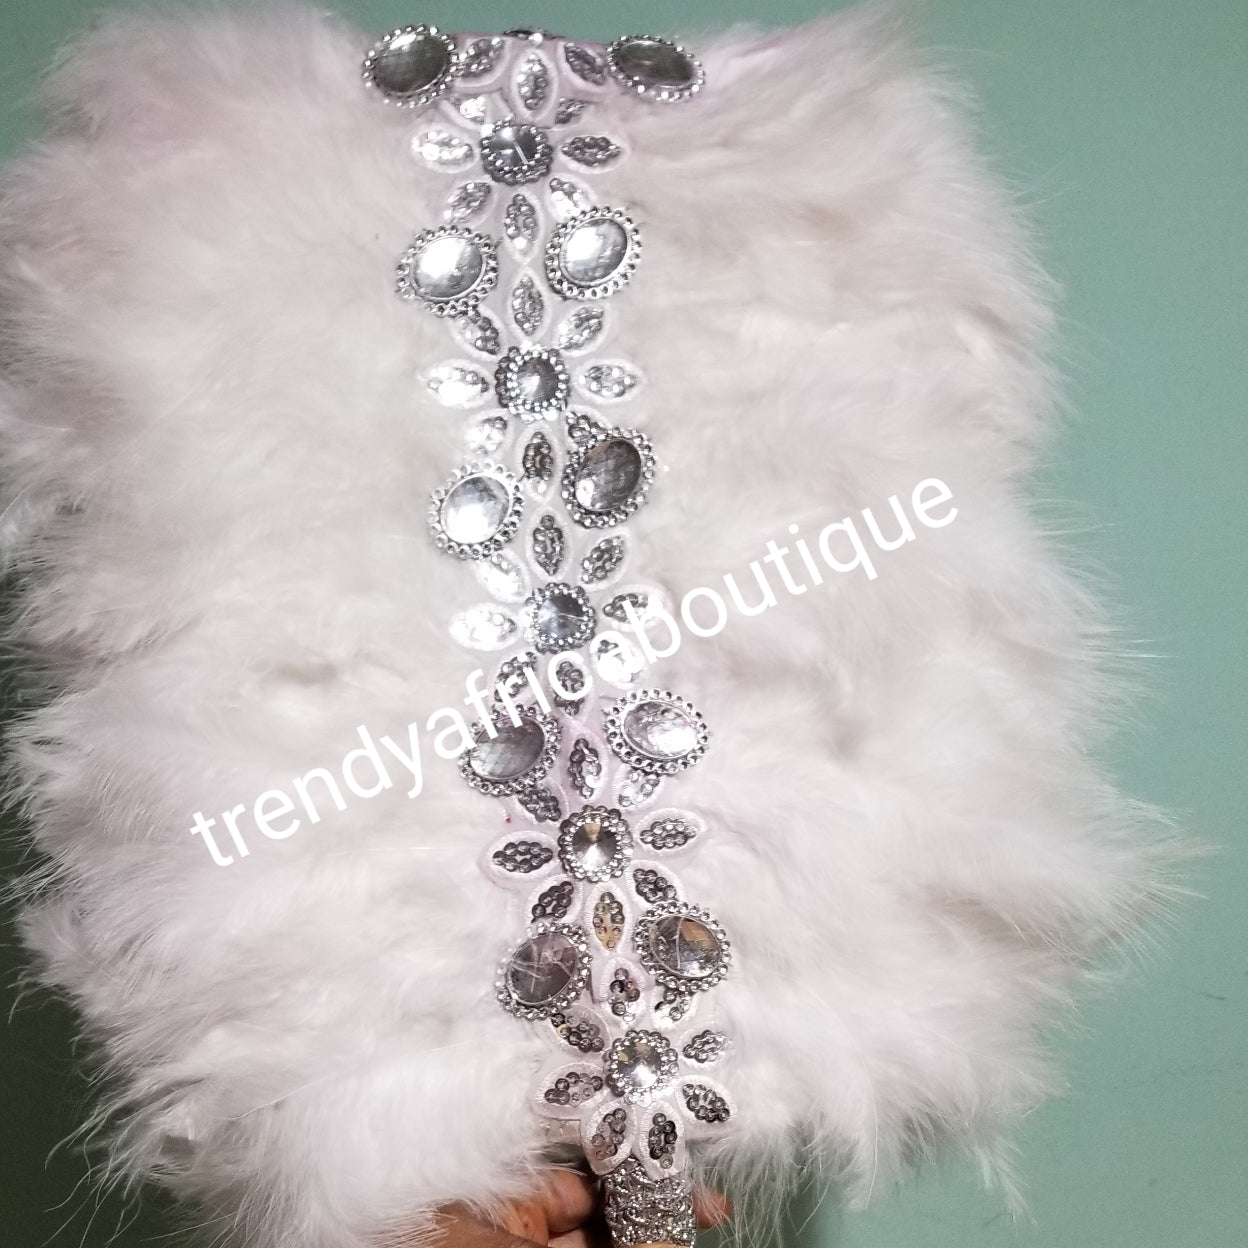 Clearance feather hand fan in beautiful white/silver accessories. Nigerian traditional Bridal Accessories hand fan for celebrant. Fully handmade with silver handle & white tassels. fluffy feathers hand fan